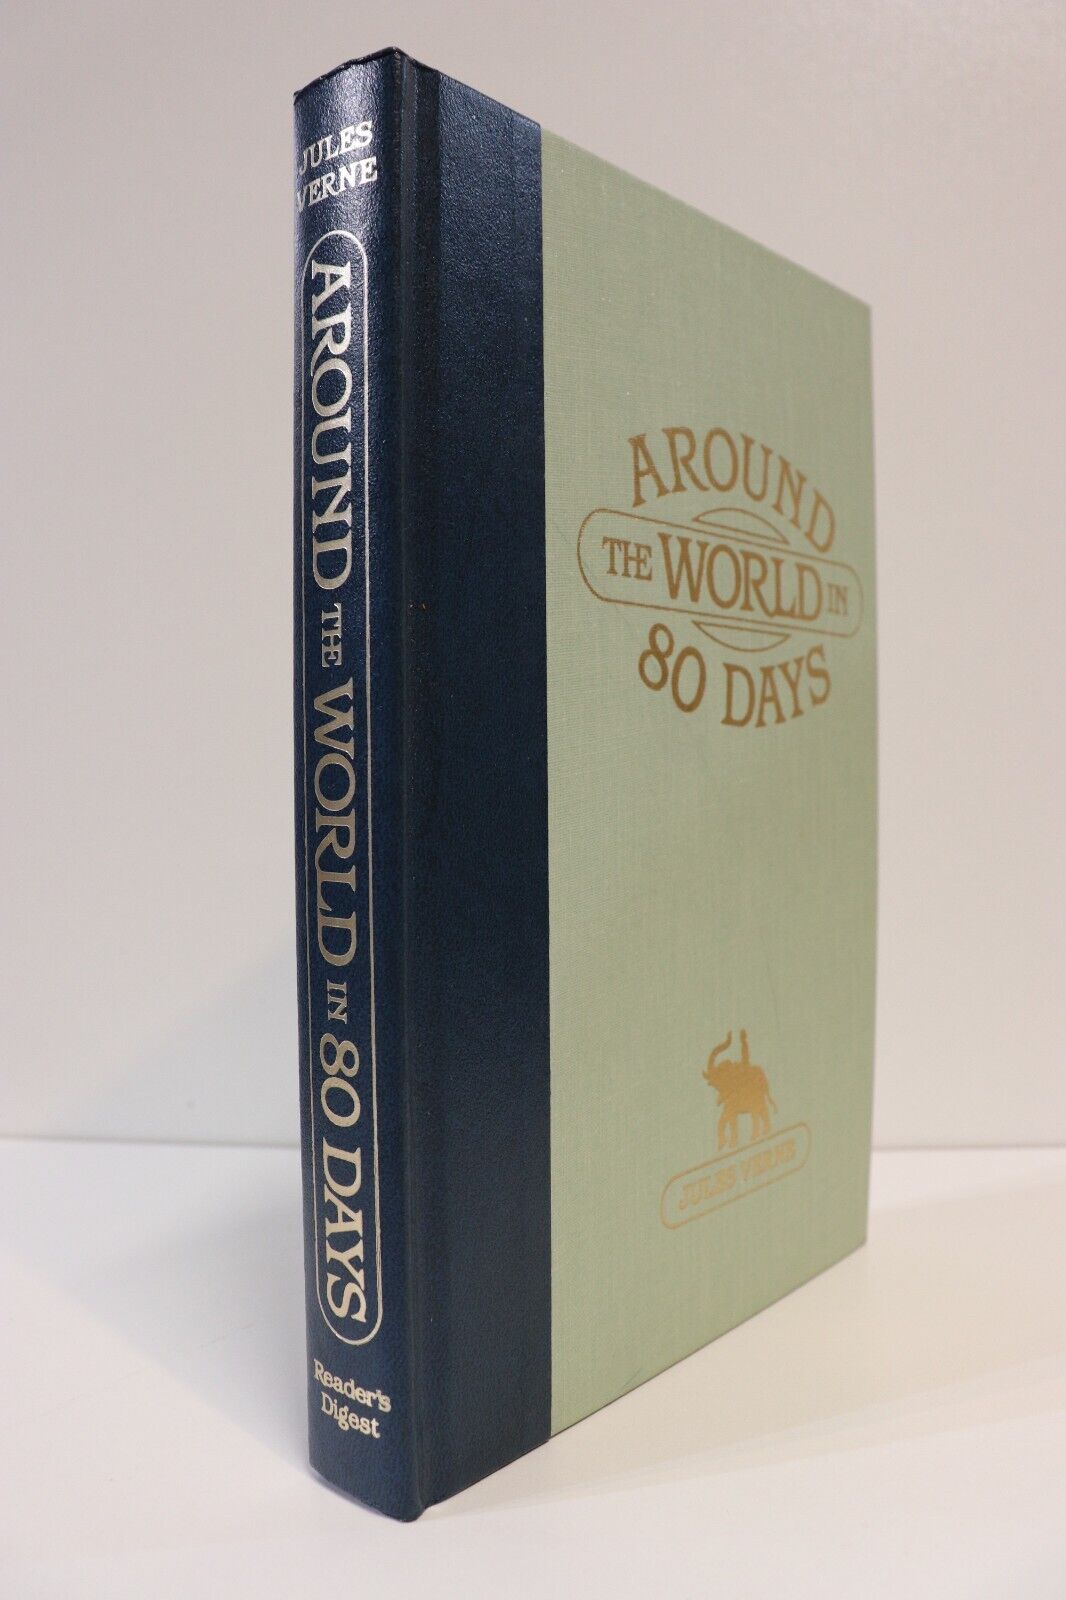 Around The World In Eighty Days by J Verne - 1988 - Classic Literature Book